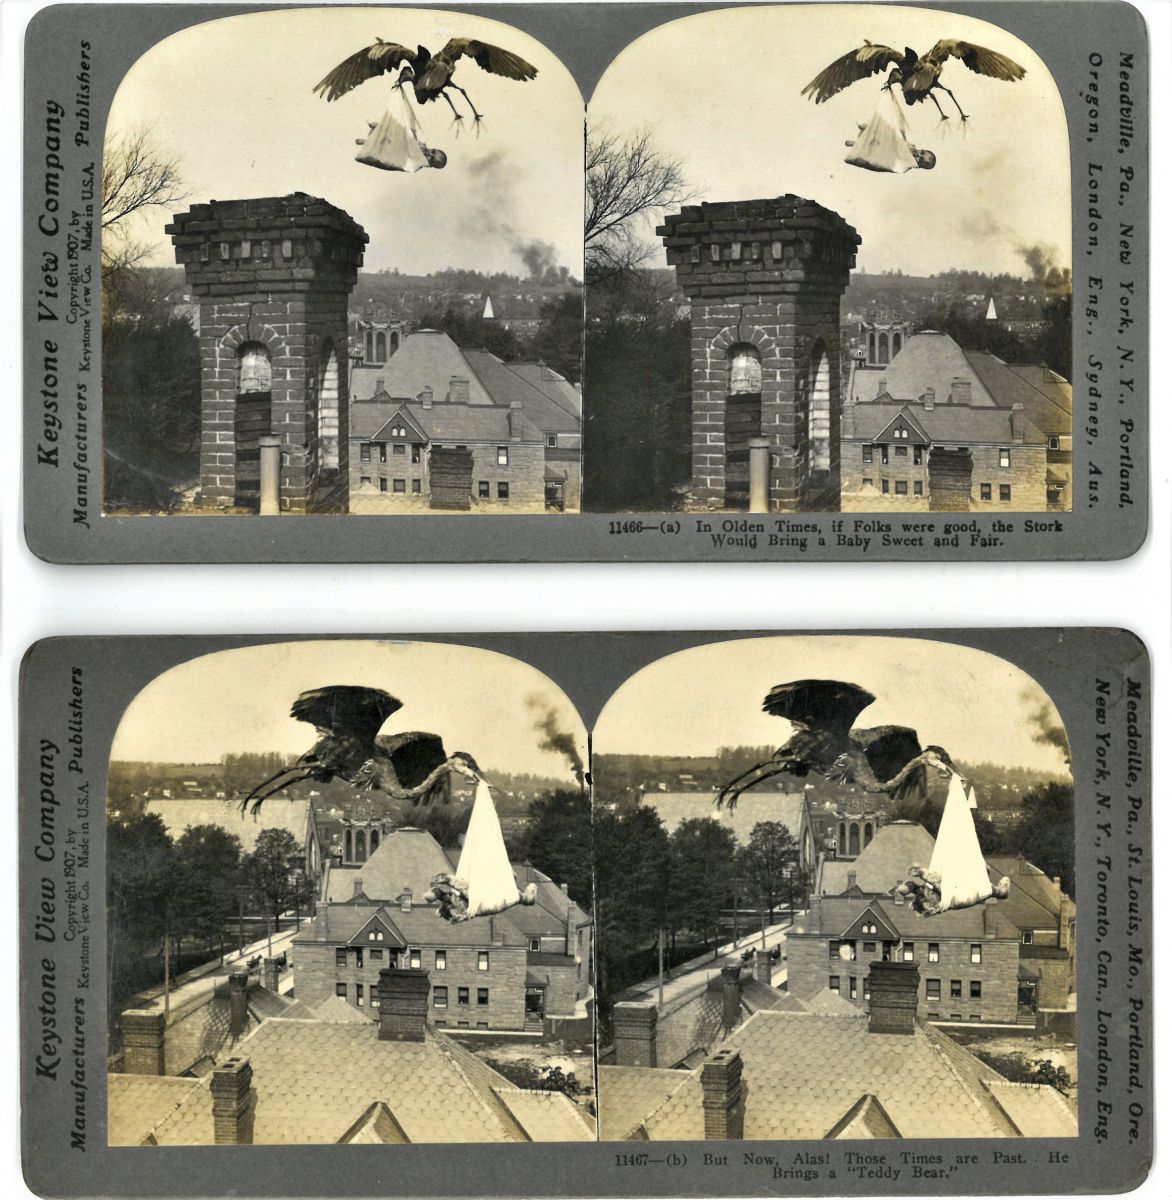 Two stereoviews, one showing a stork delivering a baby and the other showing a stork delivering a teddy bear.